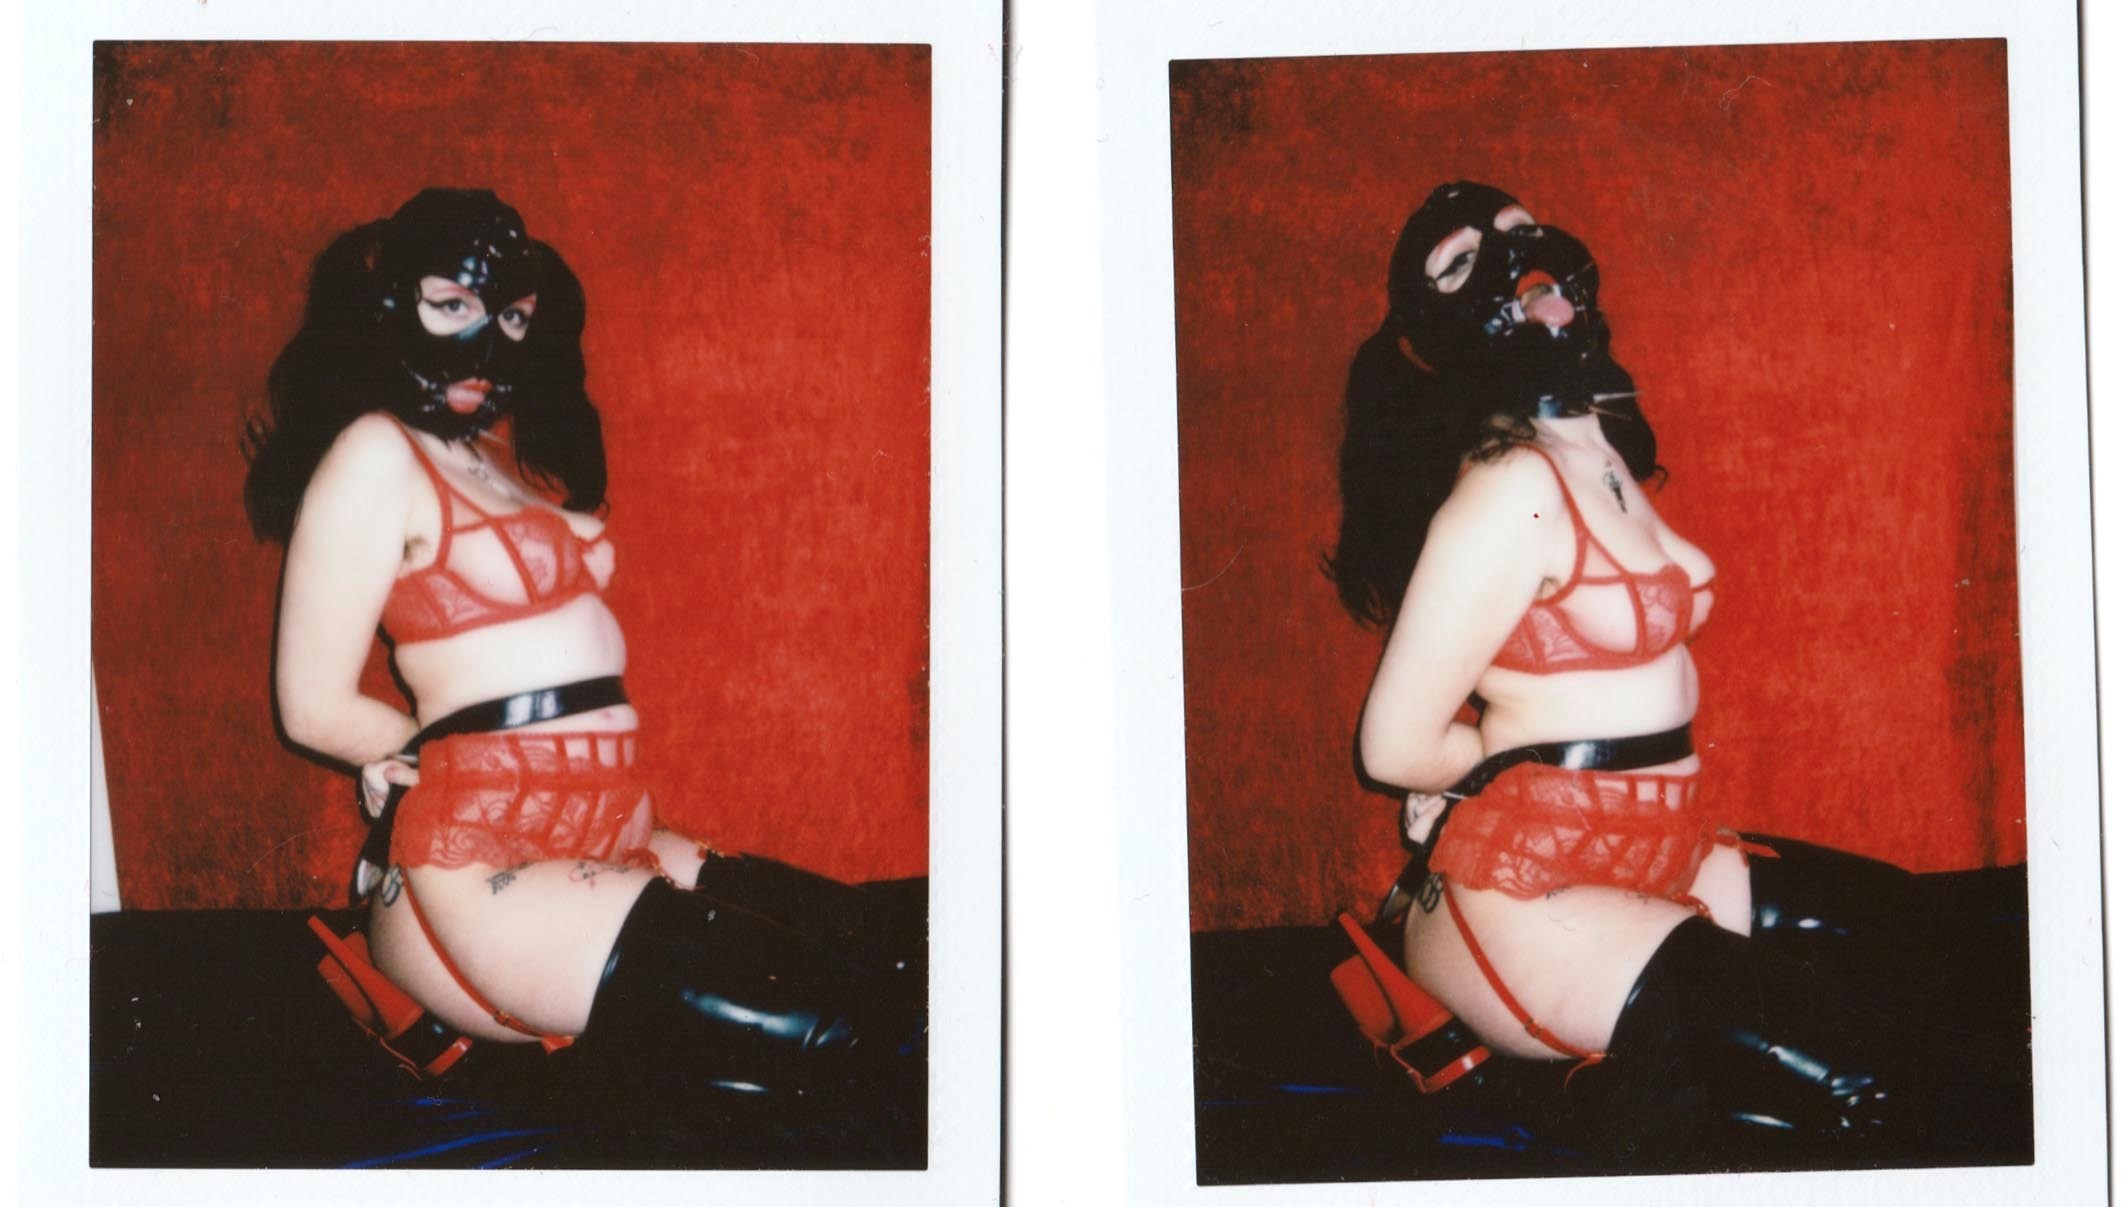 The photographers redefining the erotic image for the 21st century Dazed image